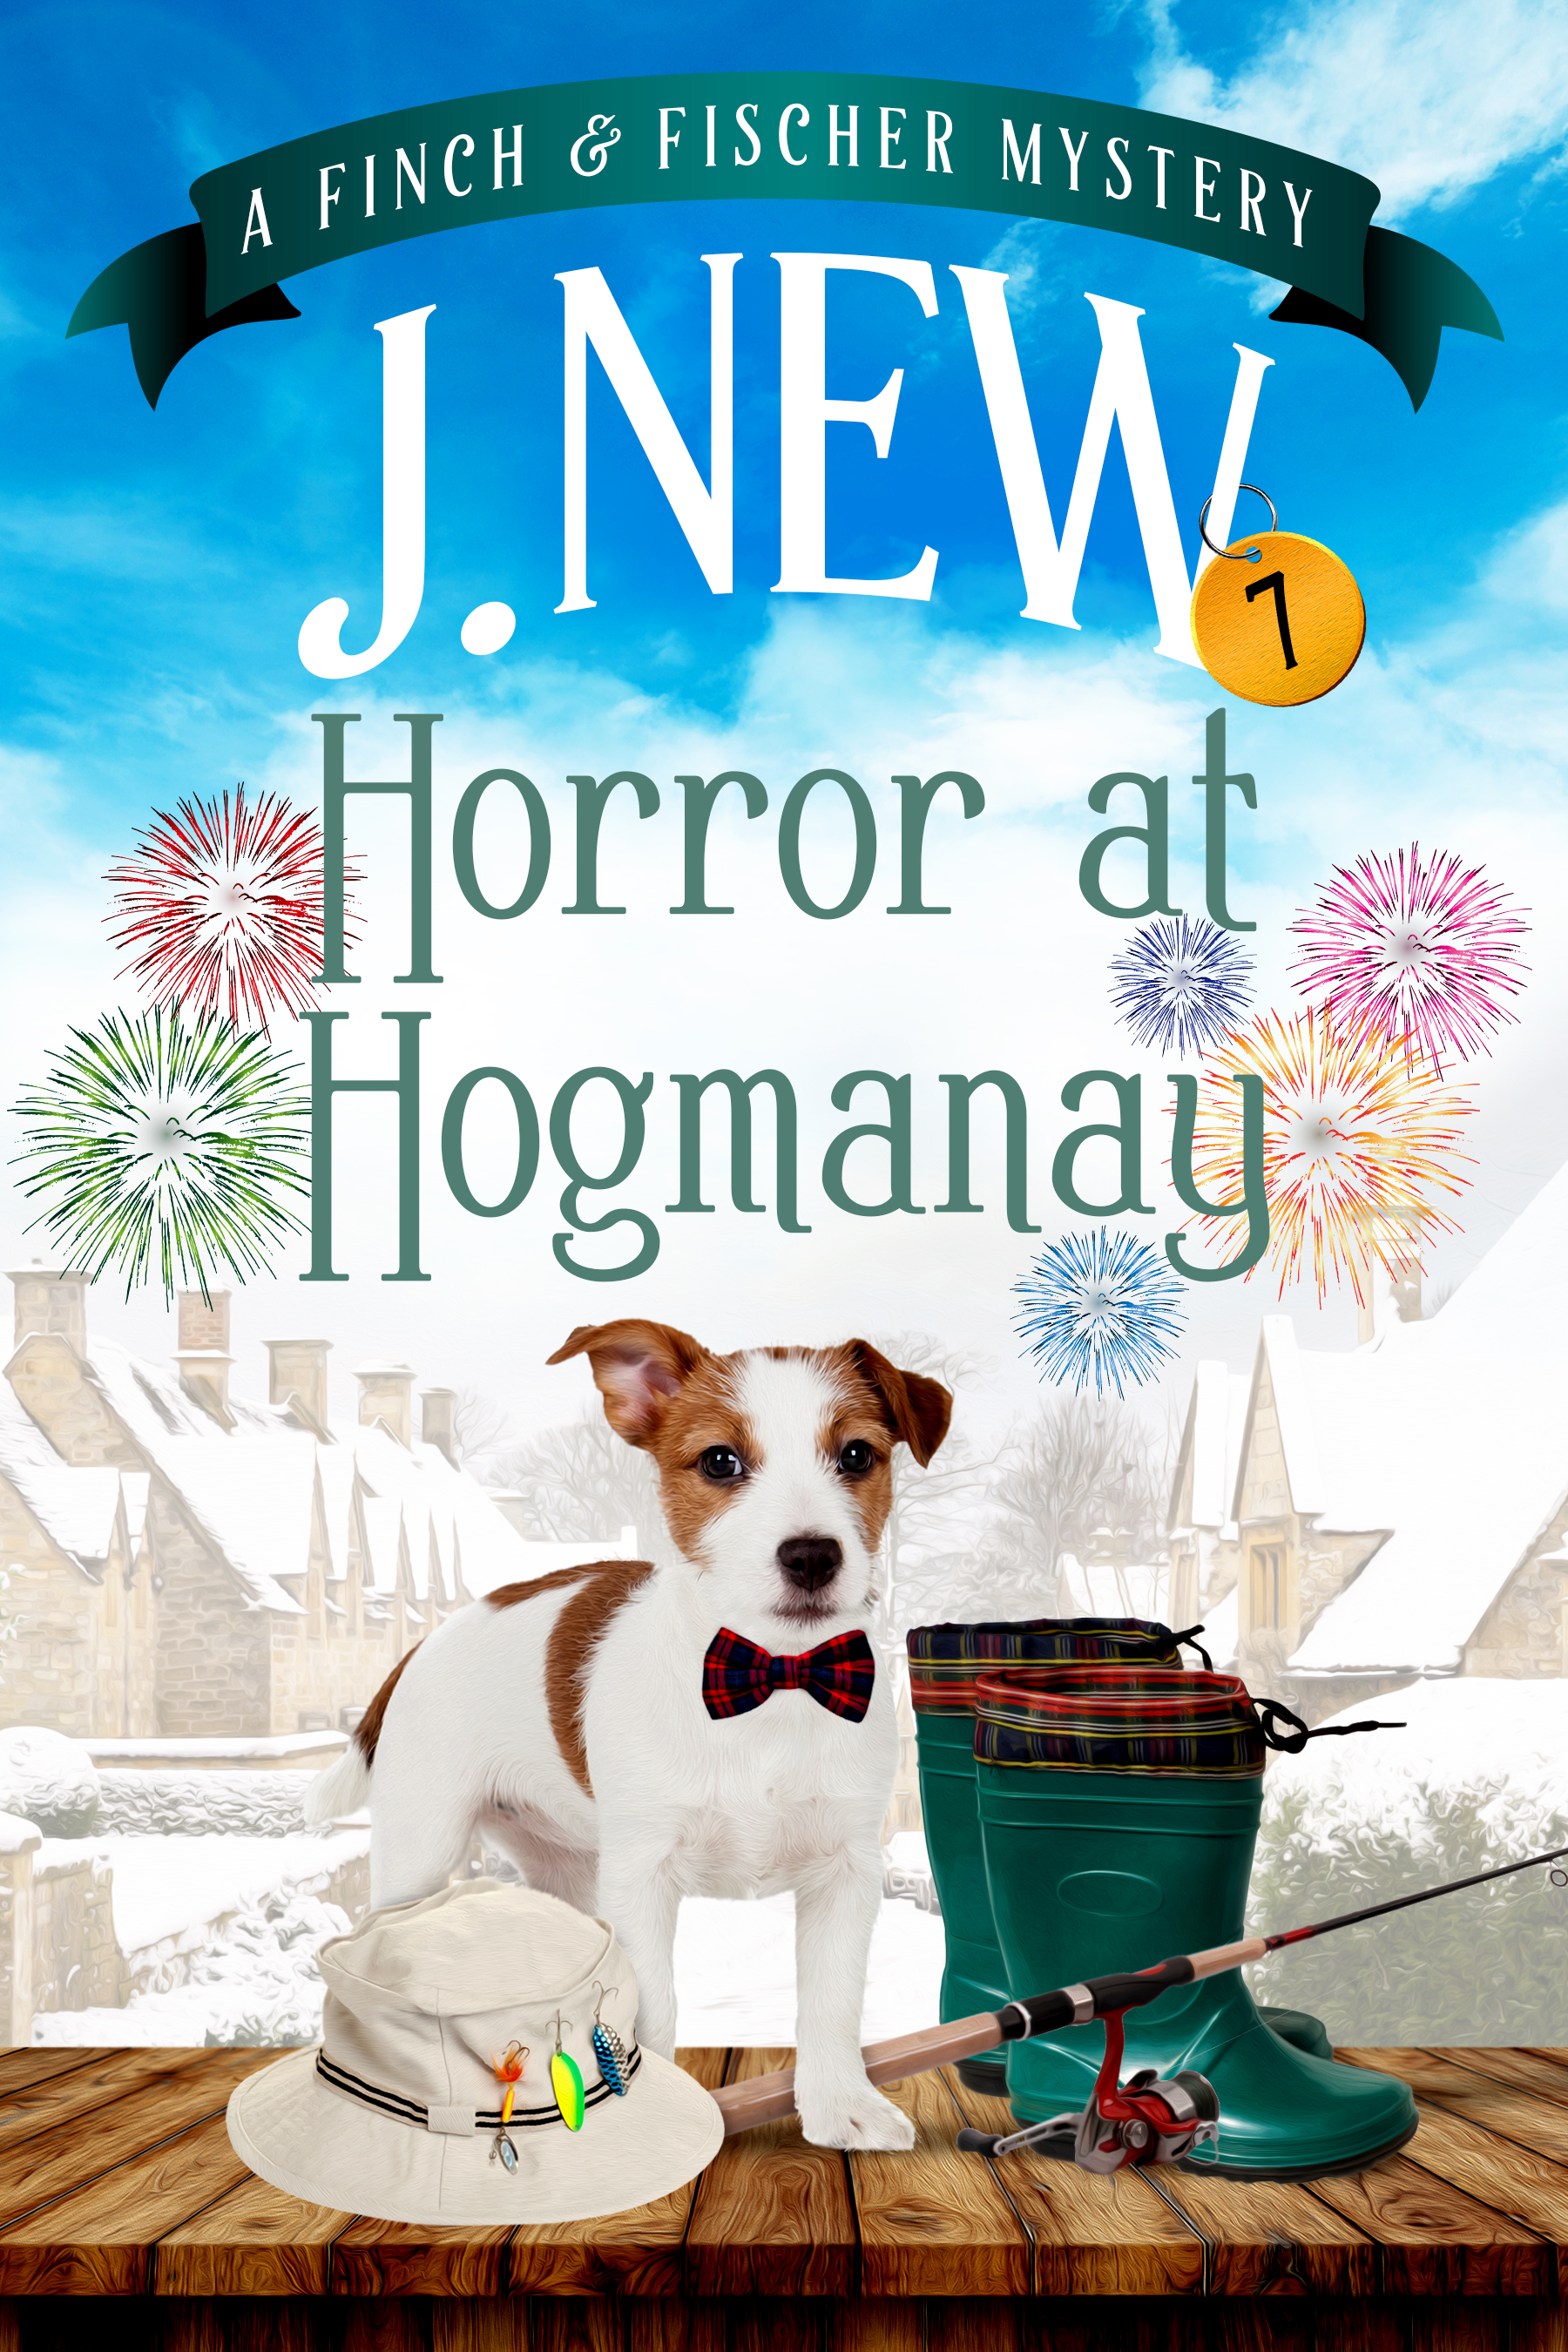 Horror at Hogmanay book 7 in the populat Finch and Fischer British cozy mystery series by J. New